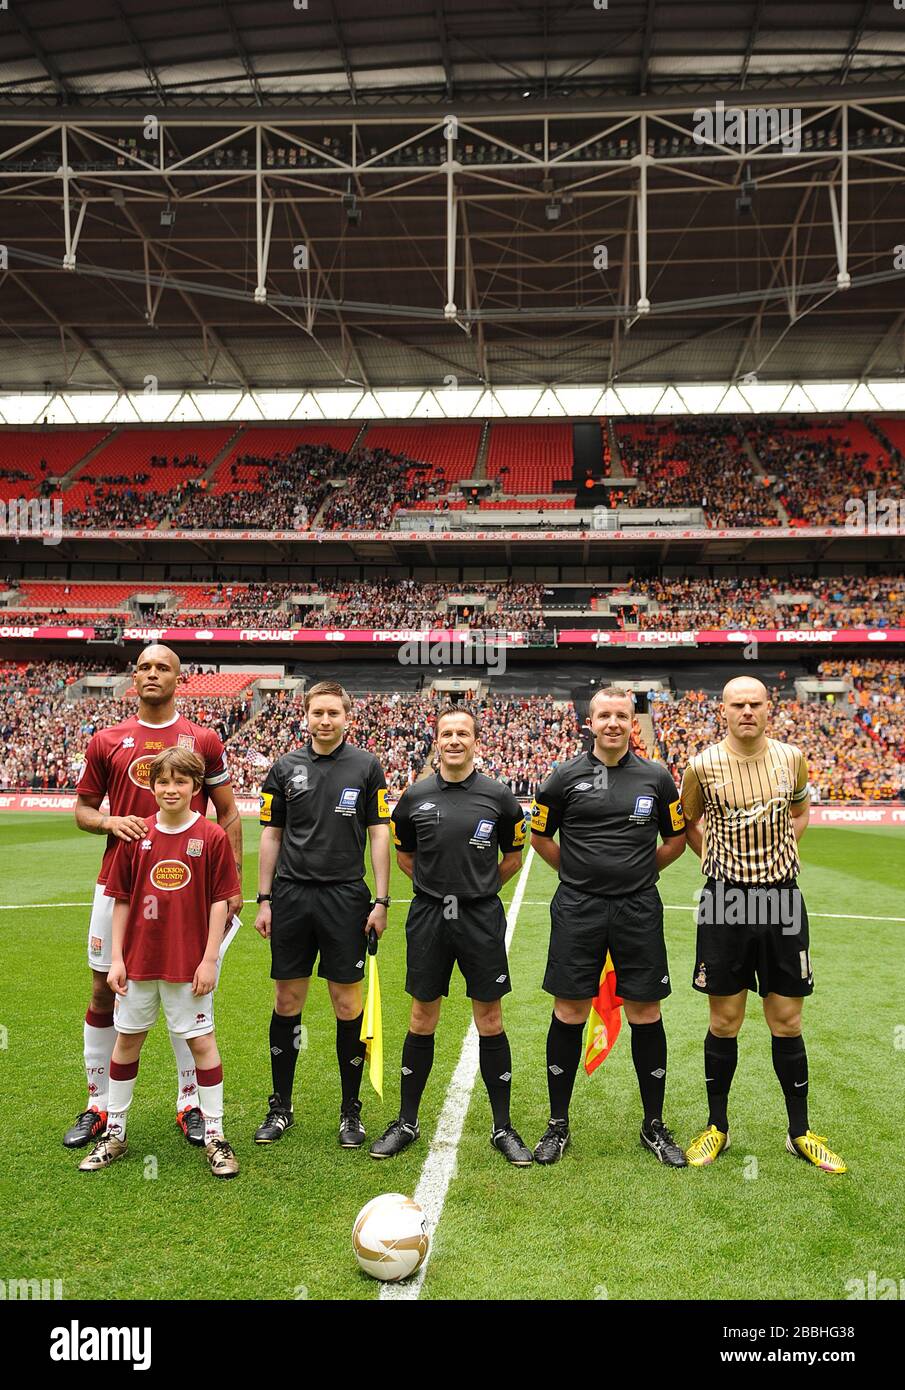 L-R: Northampton Town captain Clarke Carlisle, assistant referee Jake Hillier, referee Keith Stroud, assistant referee Steve Copeland and Bradford City captain Gary Jones line up prior to the kick off Stock Photo